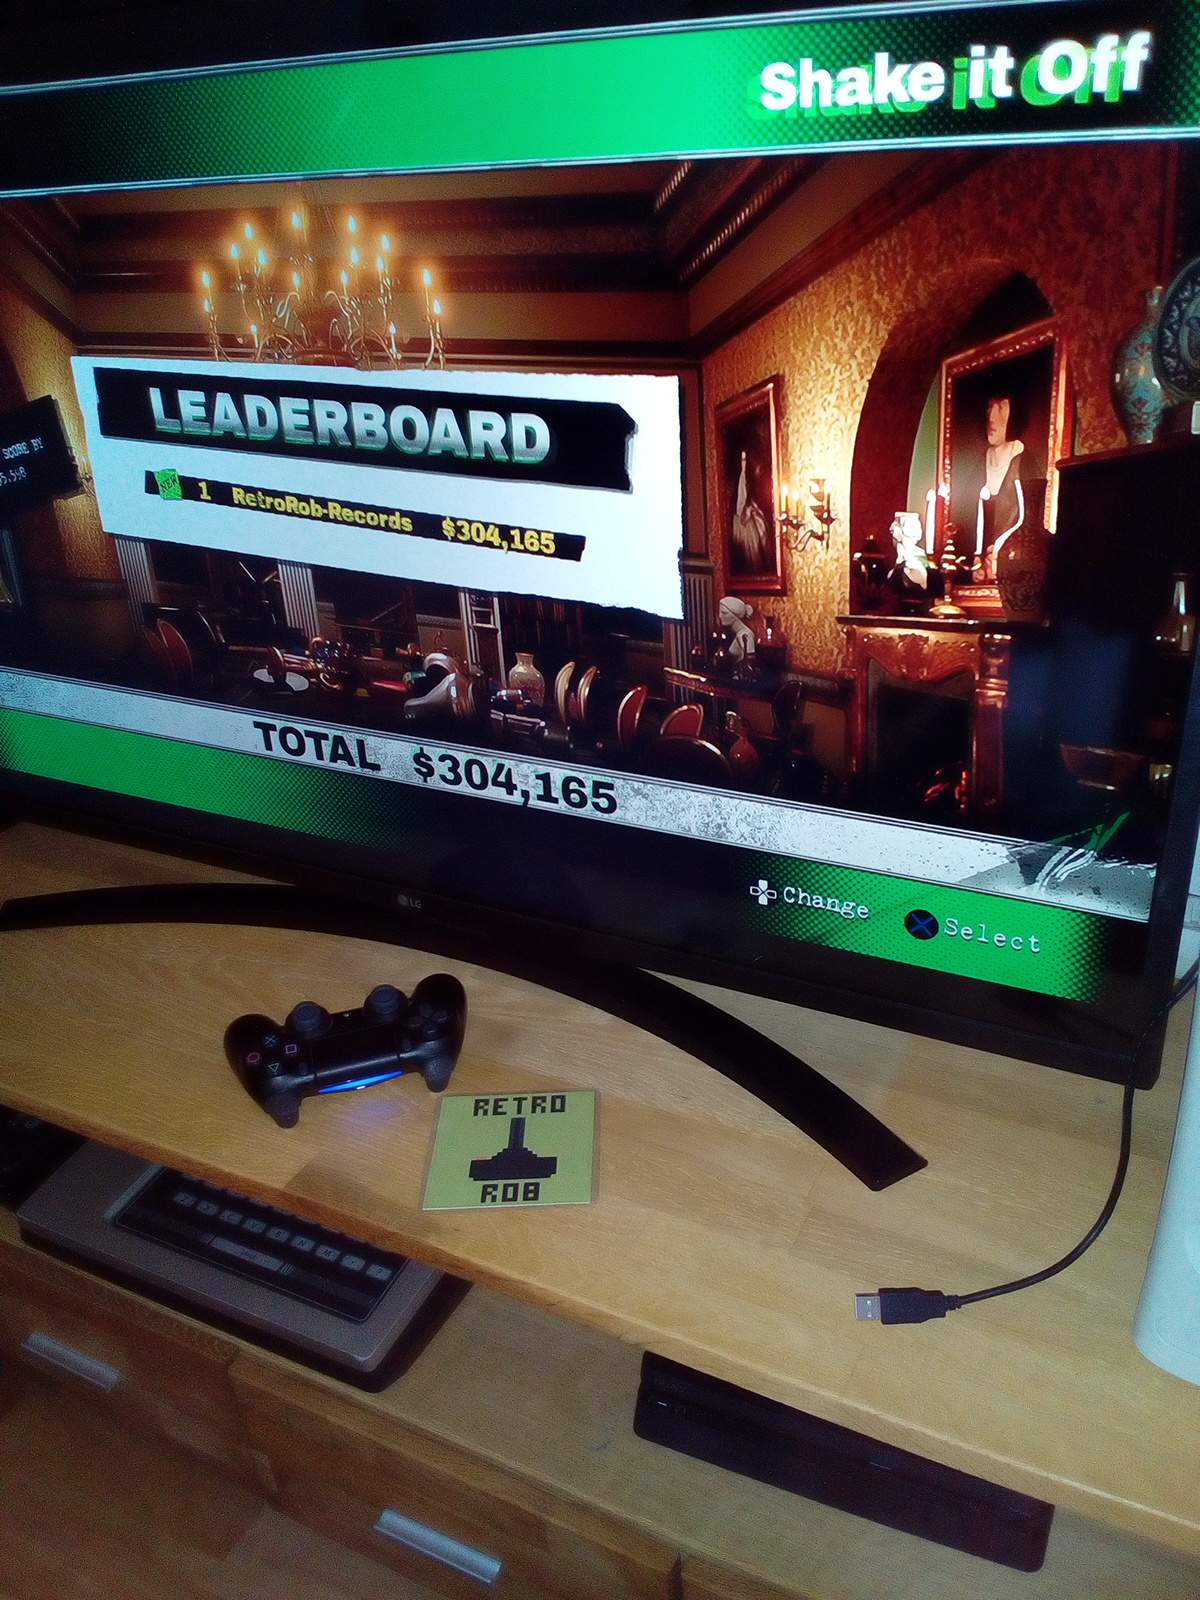 RetroRob: Dangerous Golf: France: Dining Room: Shake It Off (Playstation 4) 304,165 points on 2021-06-25 13:28:13